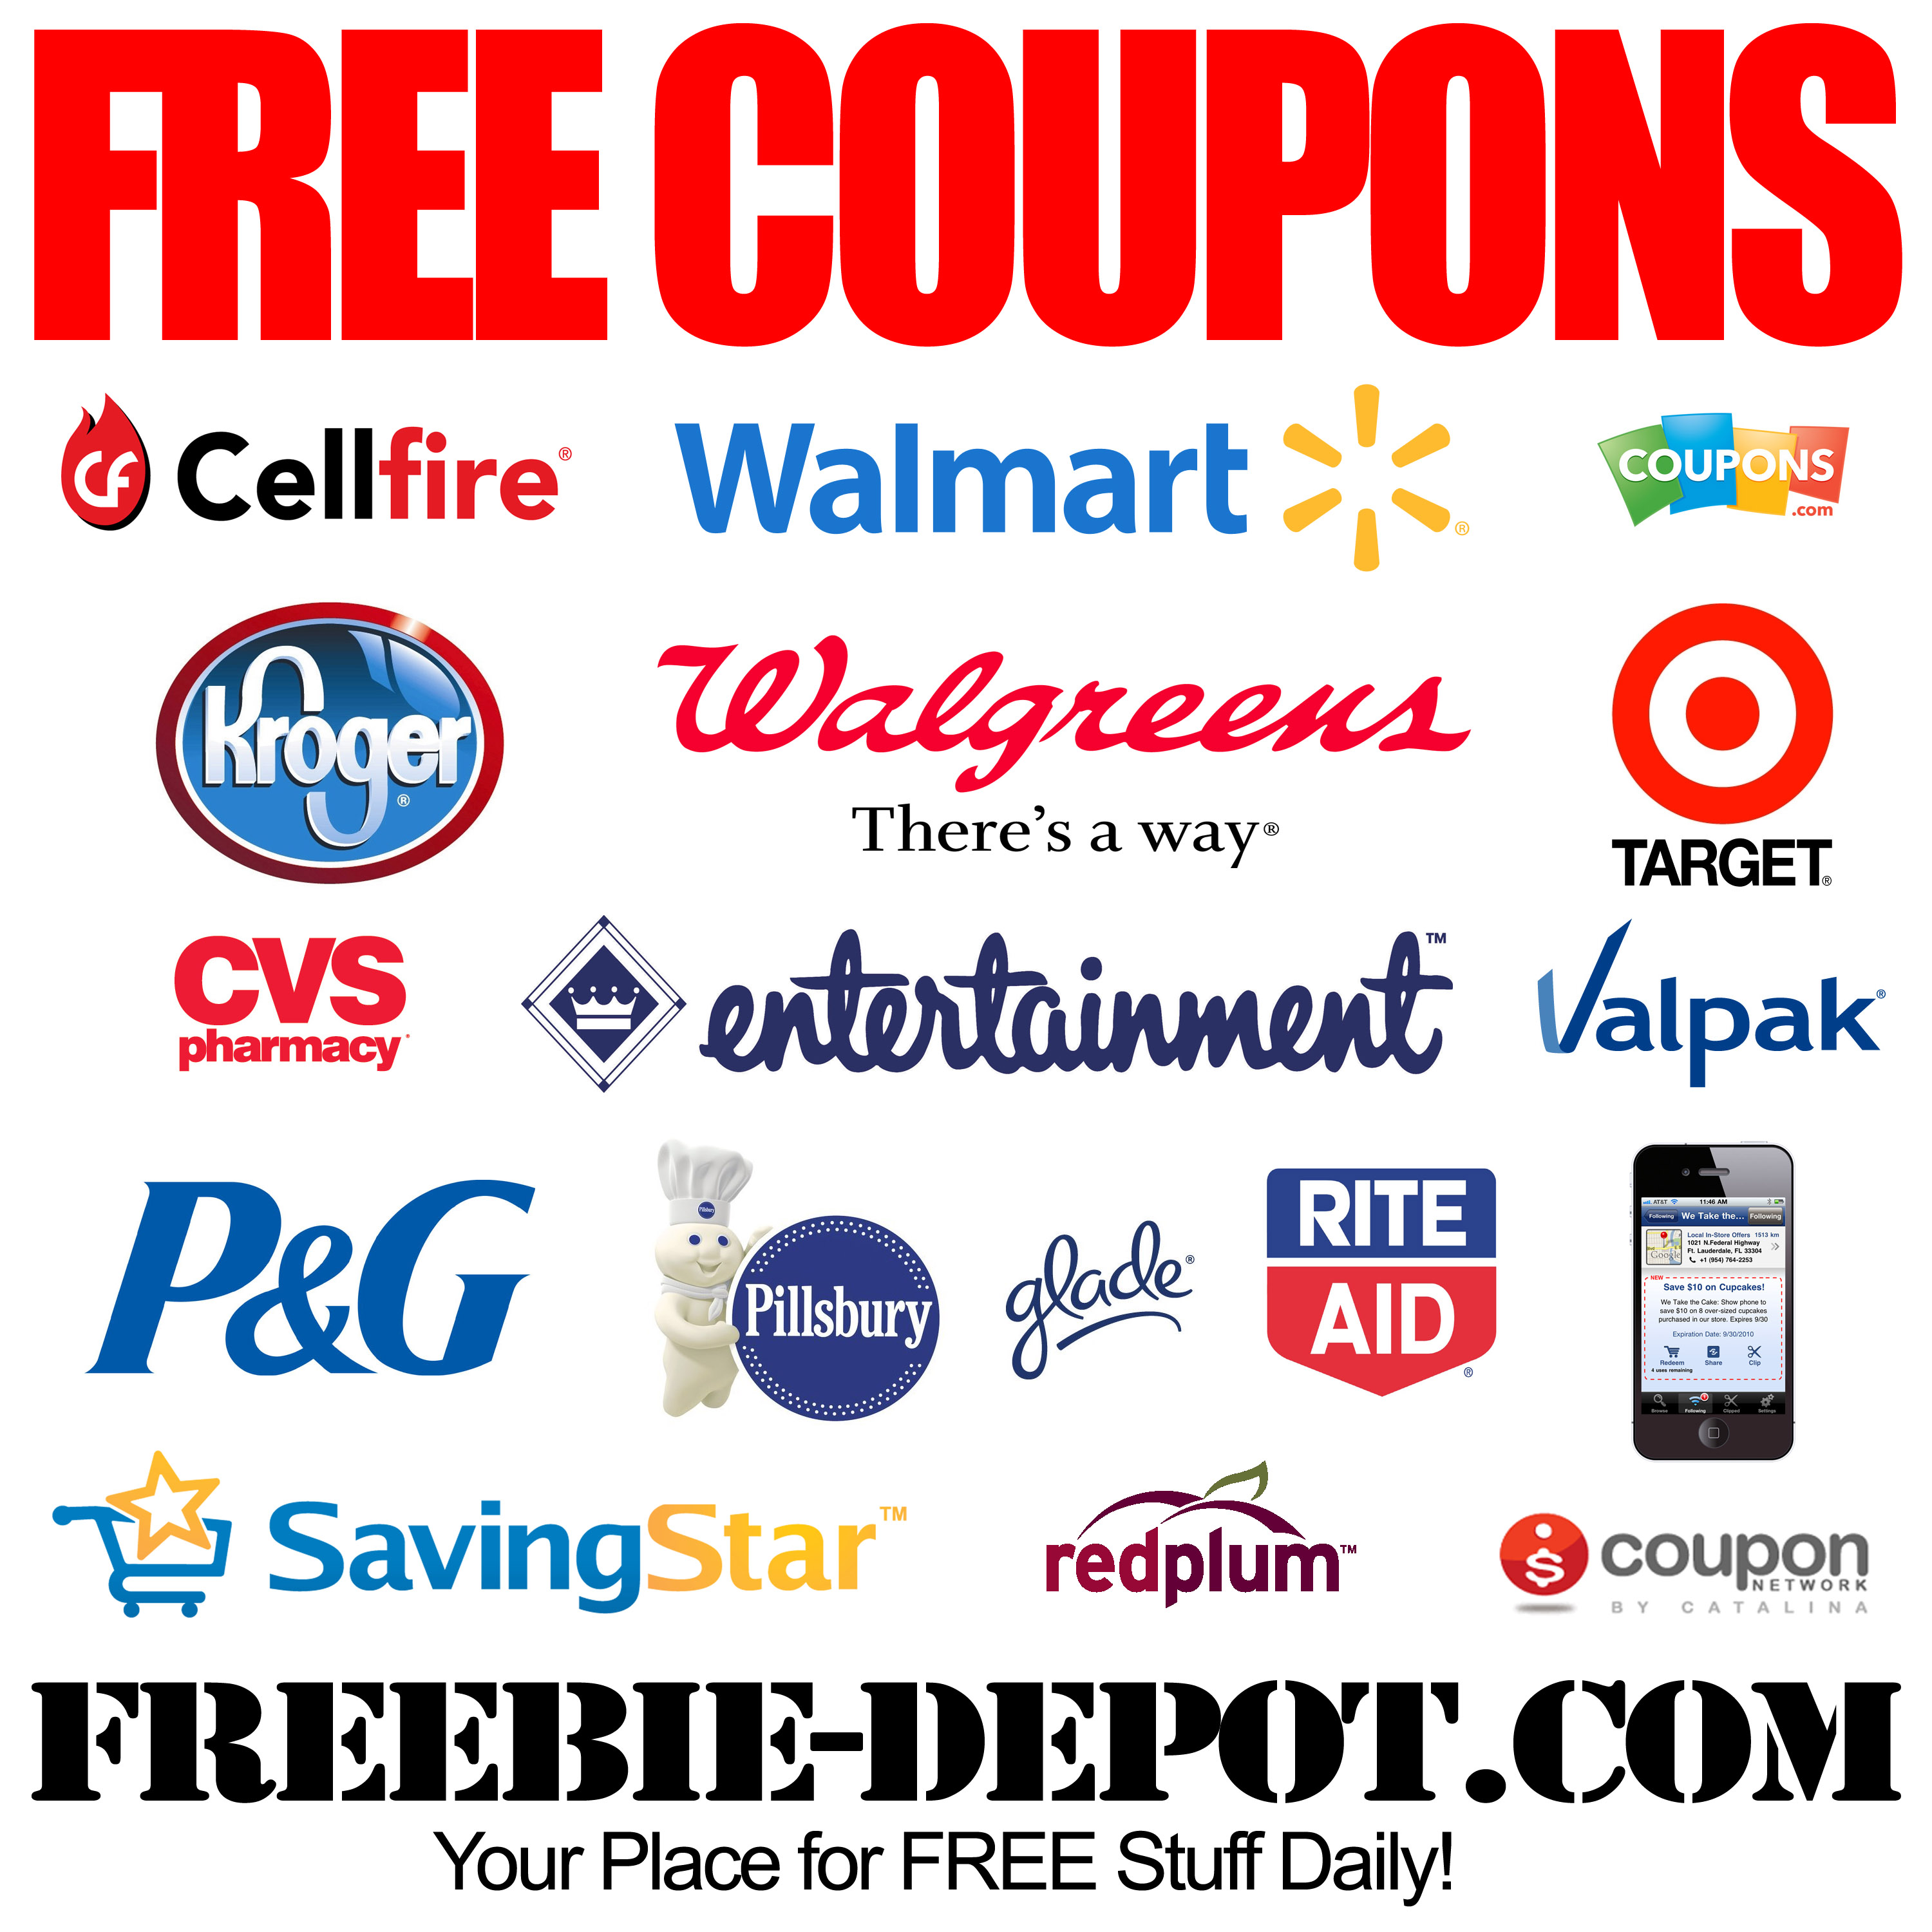 FREE Coupons FREE Grocery Coupons FREE Local Coupons FREE